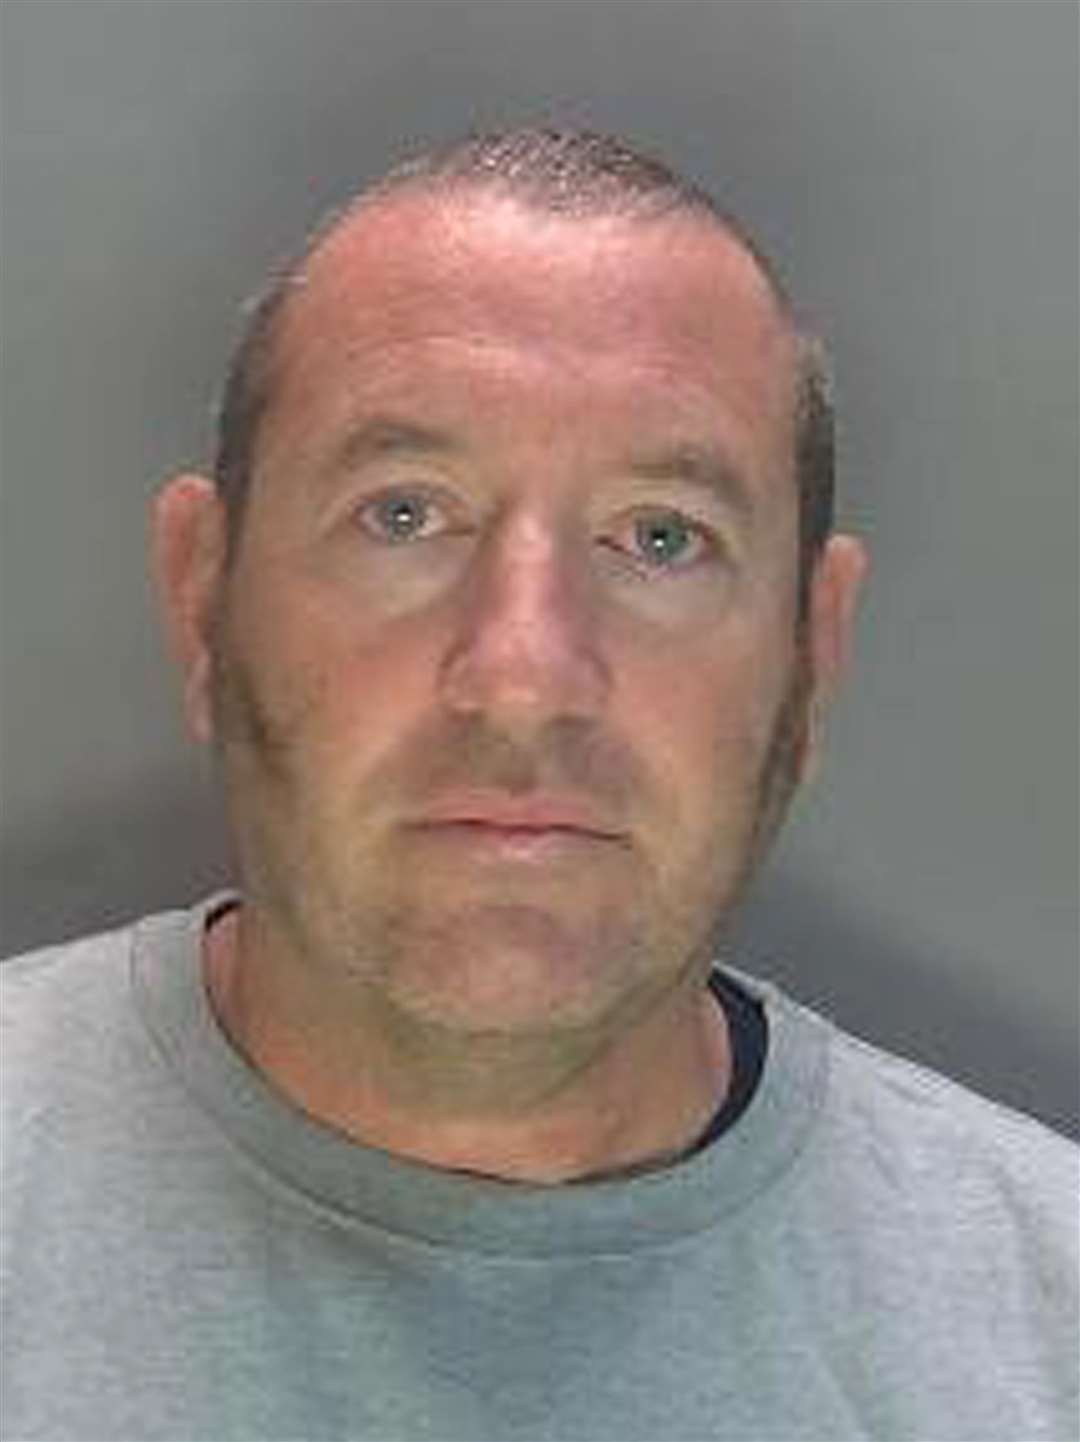 Serial rapist David Carrick was sacked from the police after admitting a string of crimes (Hertfordshire Police/PA)